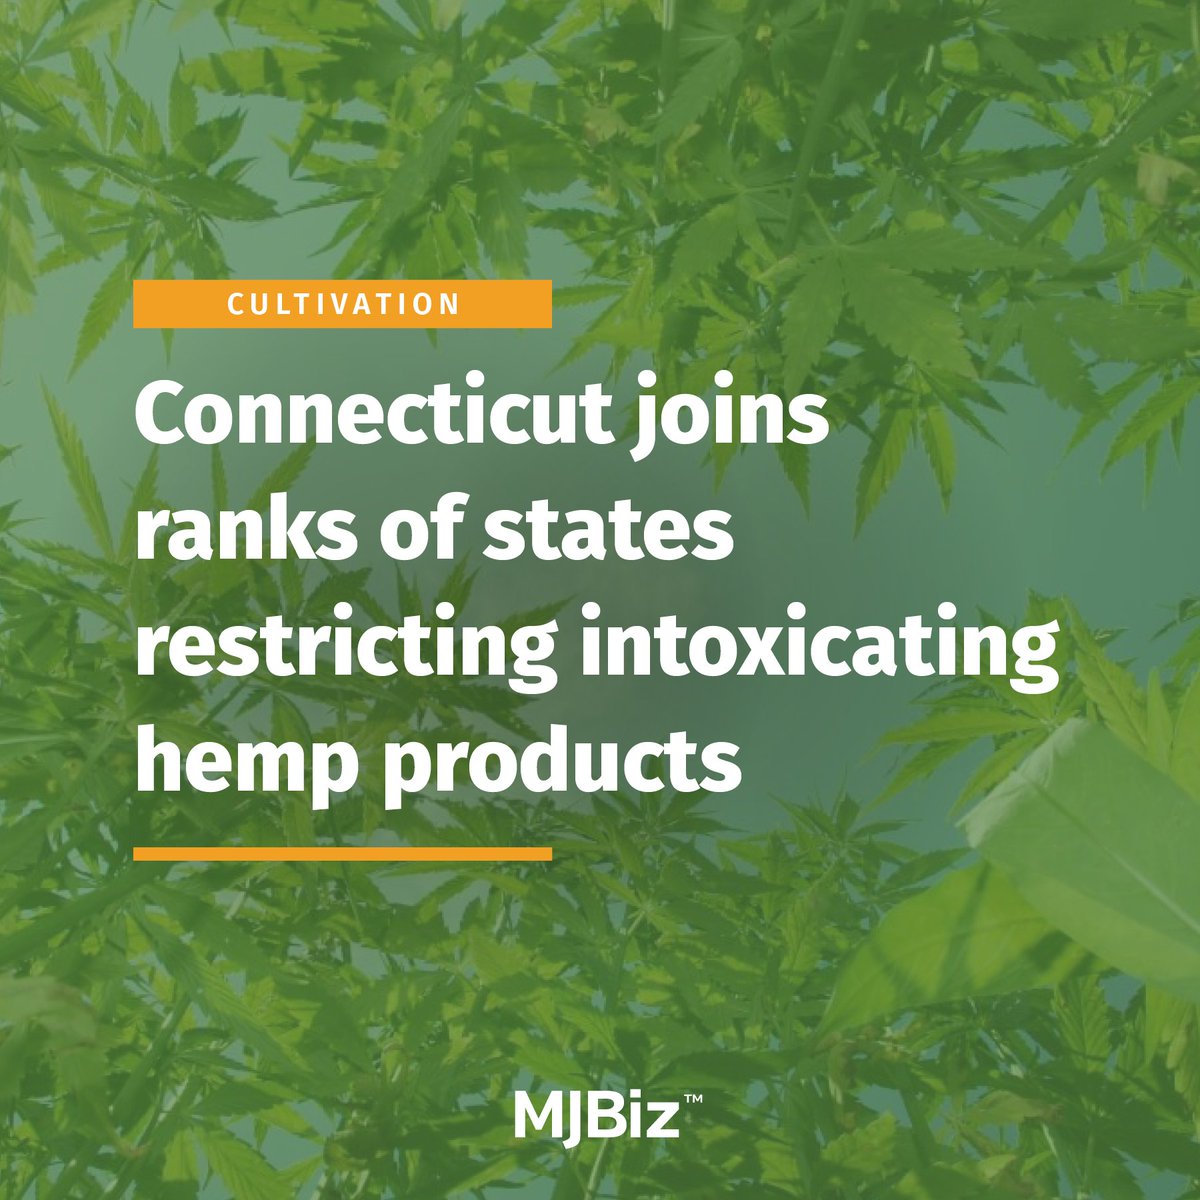 #Connecticut’s governor has signed into law a bill that will restrict and regulate #hemp products. Get the details: bit.ly/4bkiu6Q (Photo by Bits and Splits/stock.adobe.com)